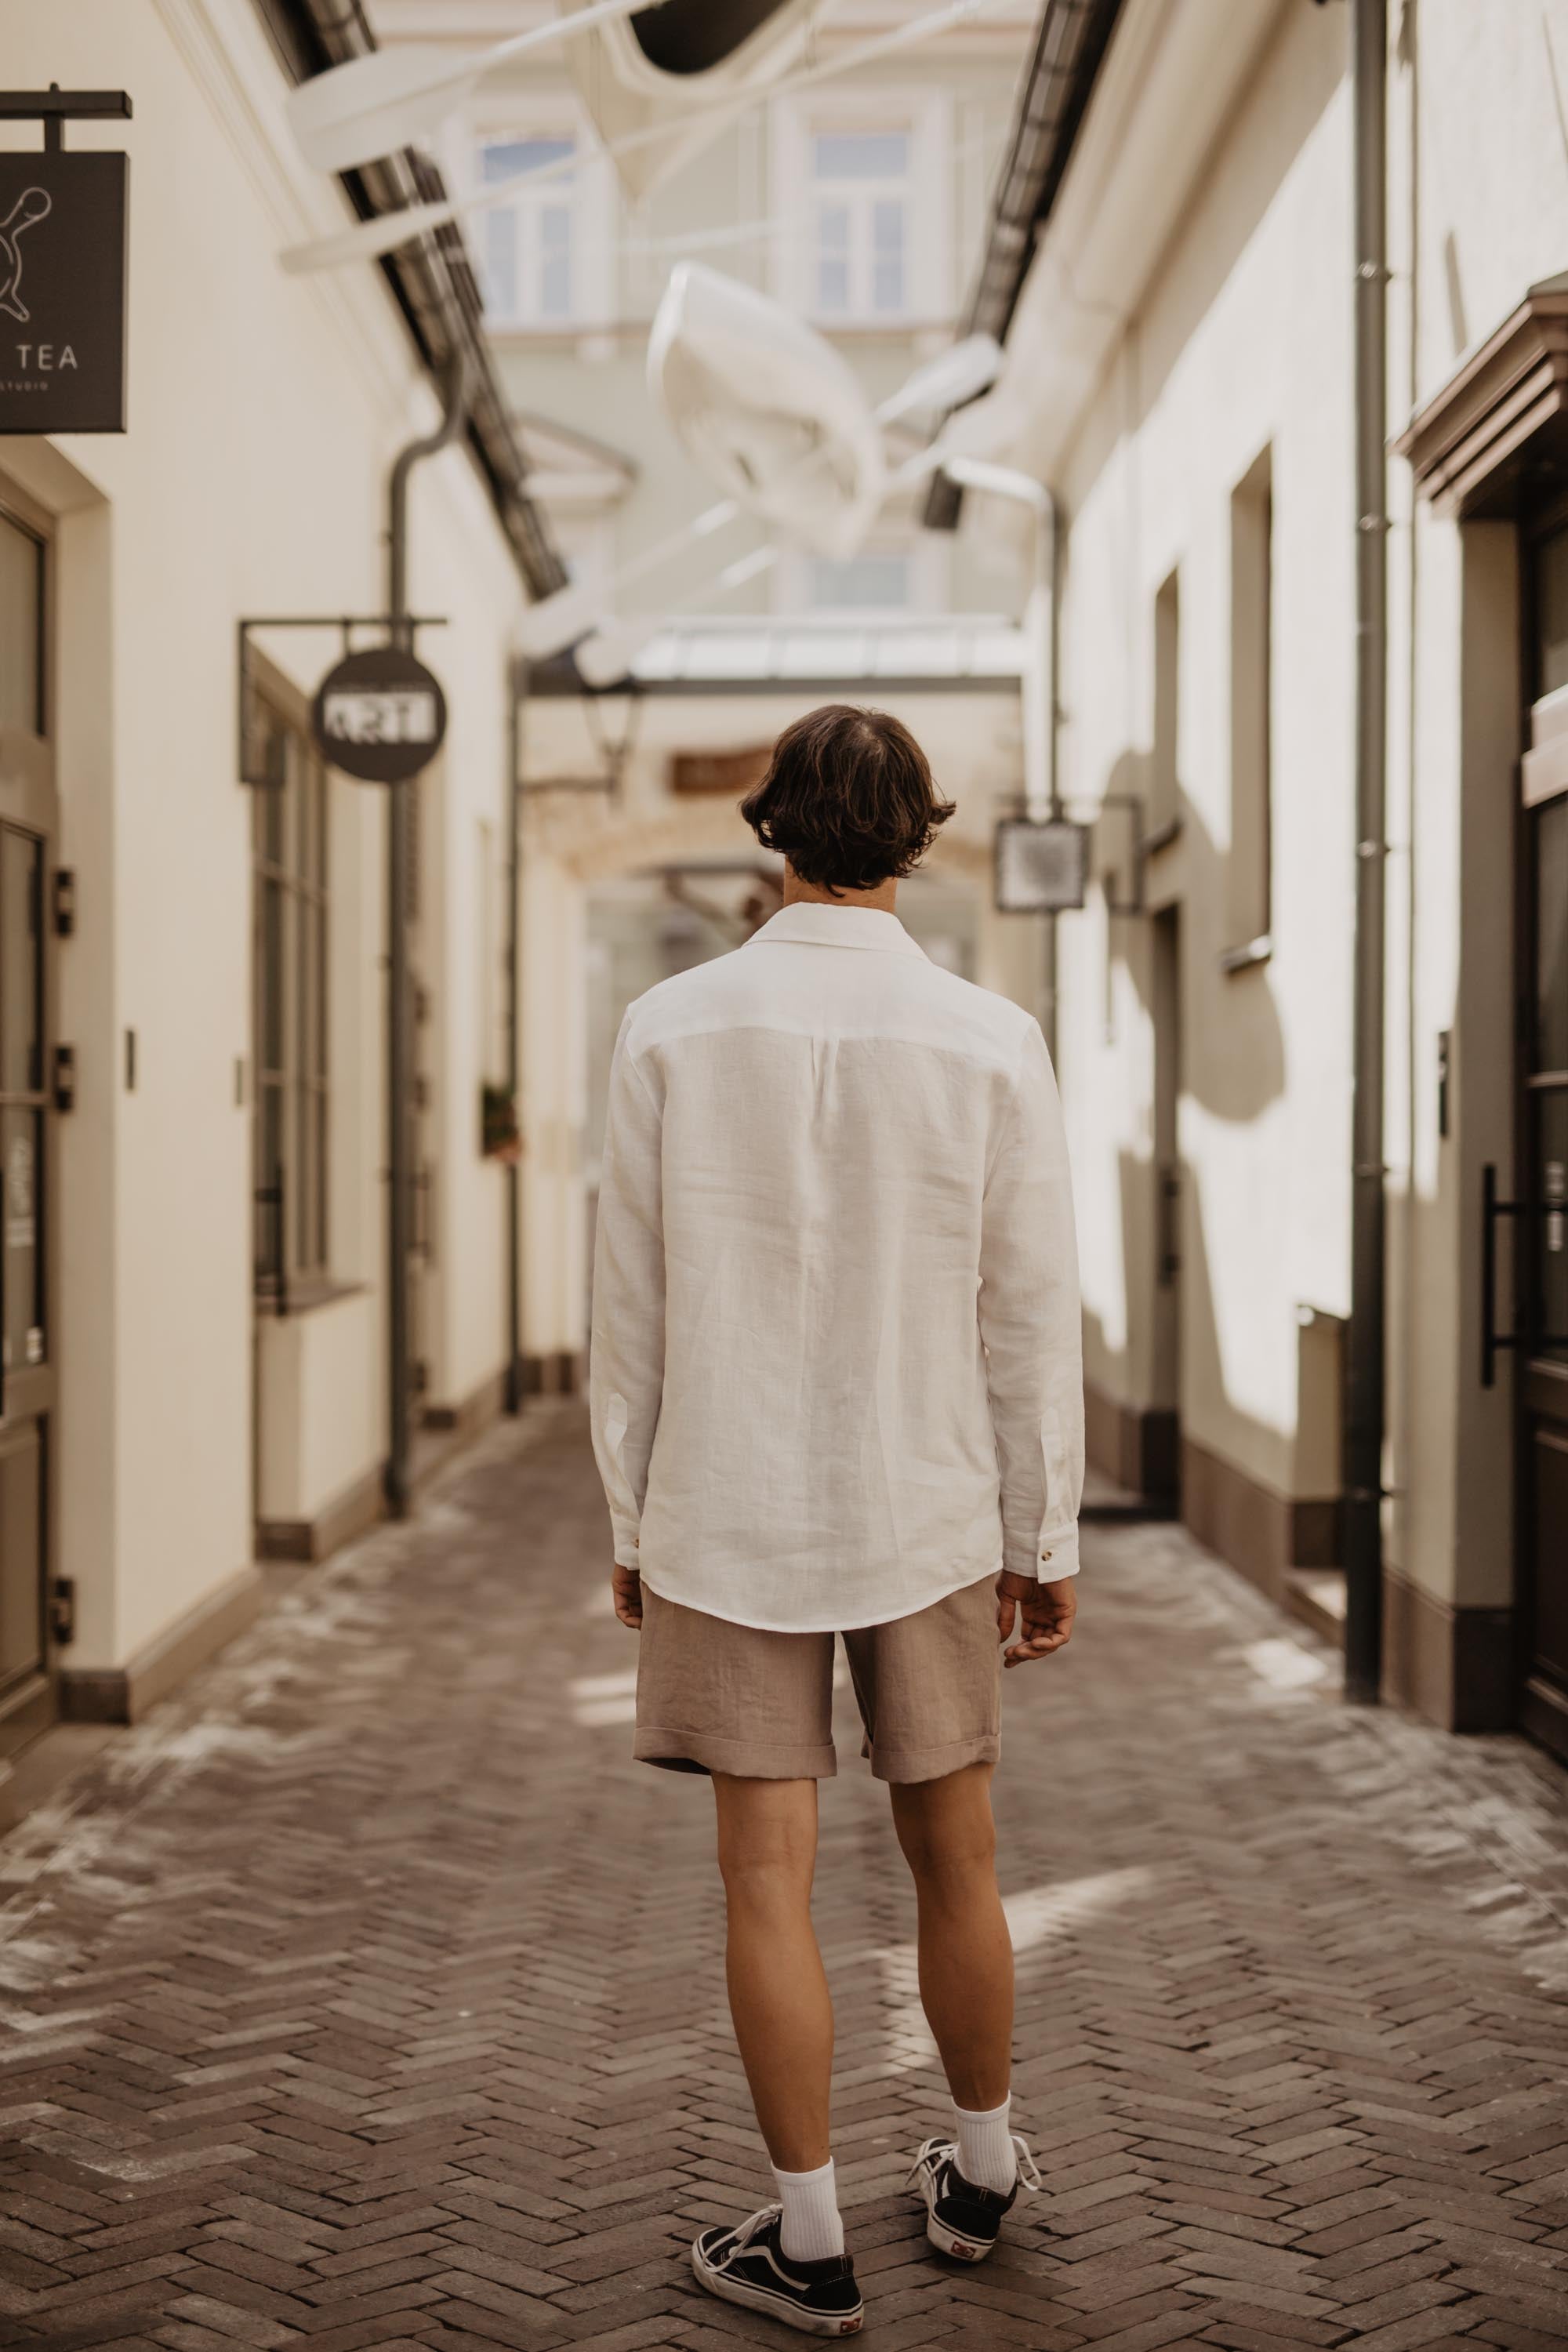 Man Wearing White Linen Shirt And Light Shorts Looking Down The Street